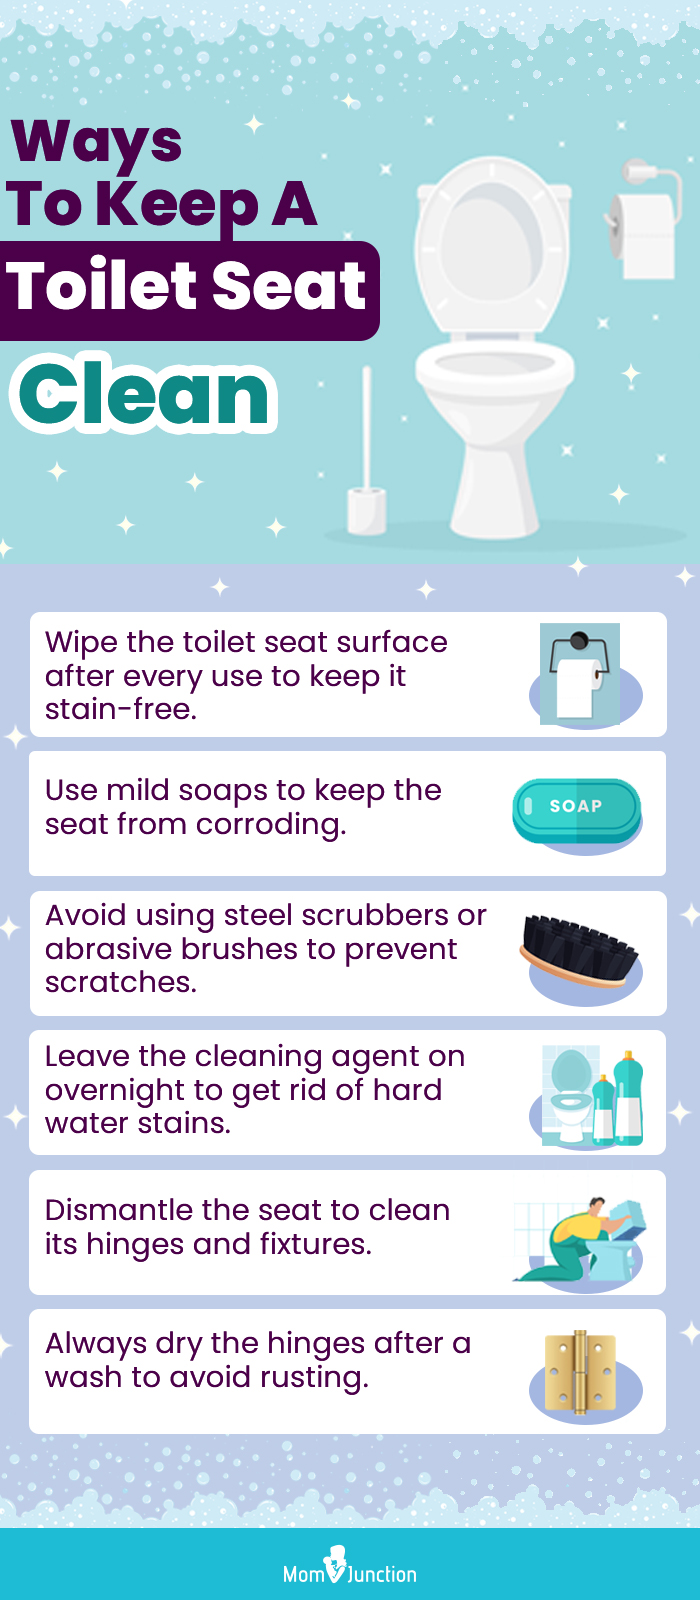 Ways To Keep A Toilet Seat Clean (Infographic)